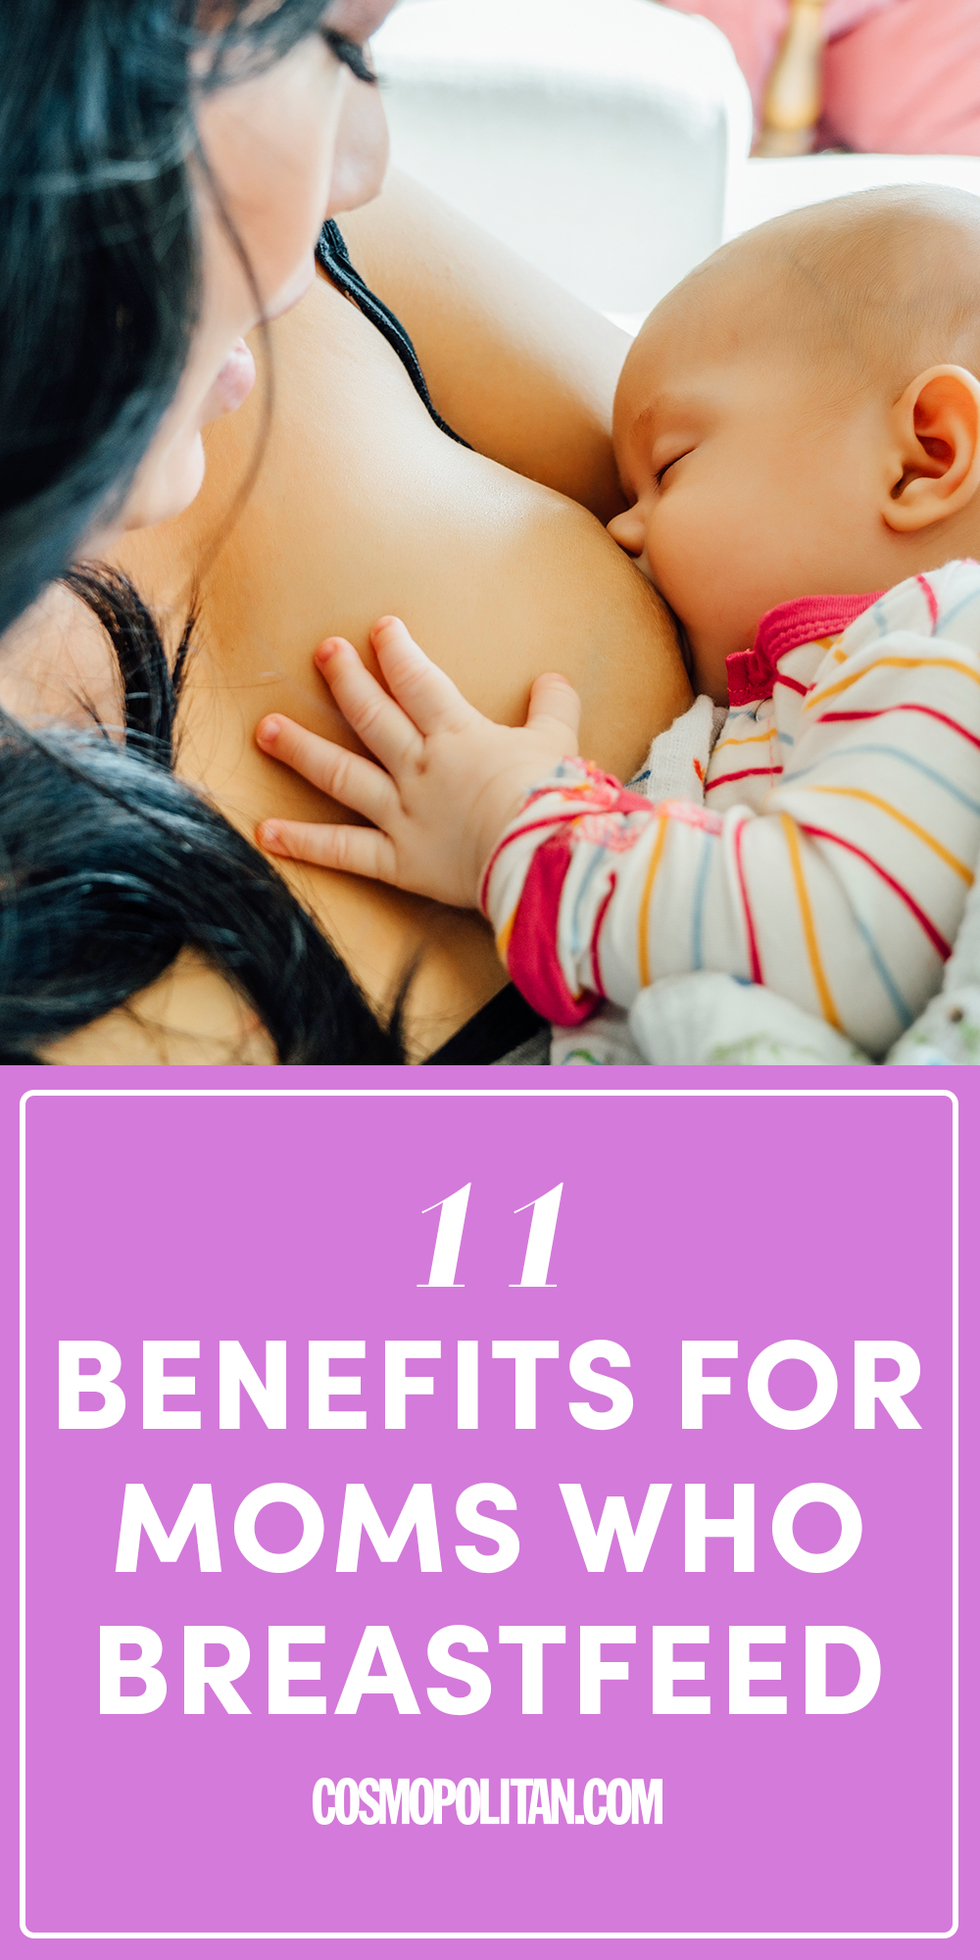 Health Benefits of Being a Mother - The American Institute of Stress